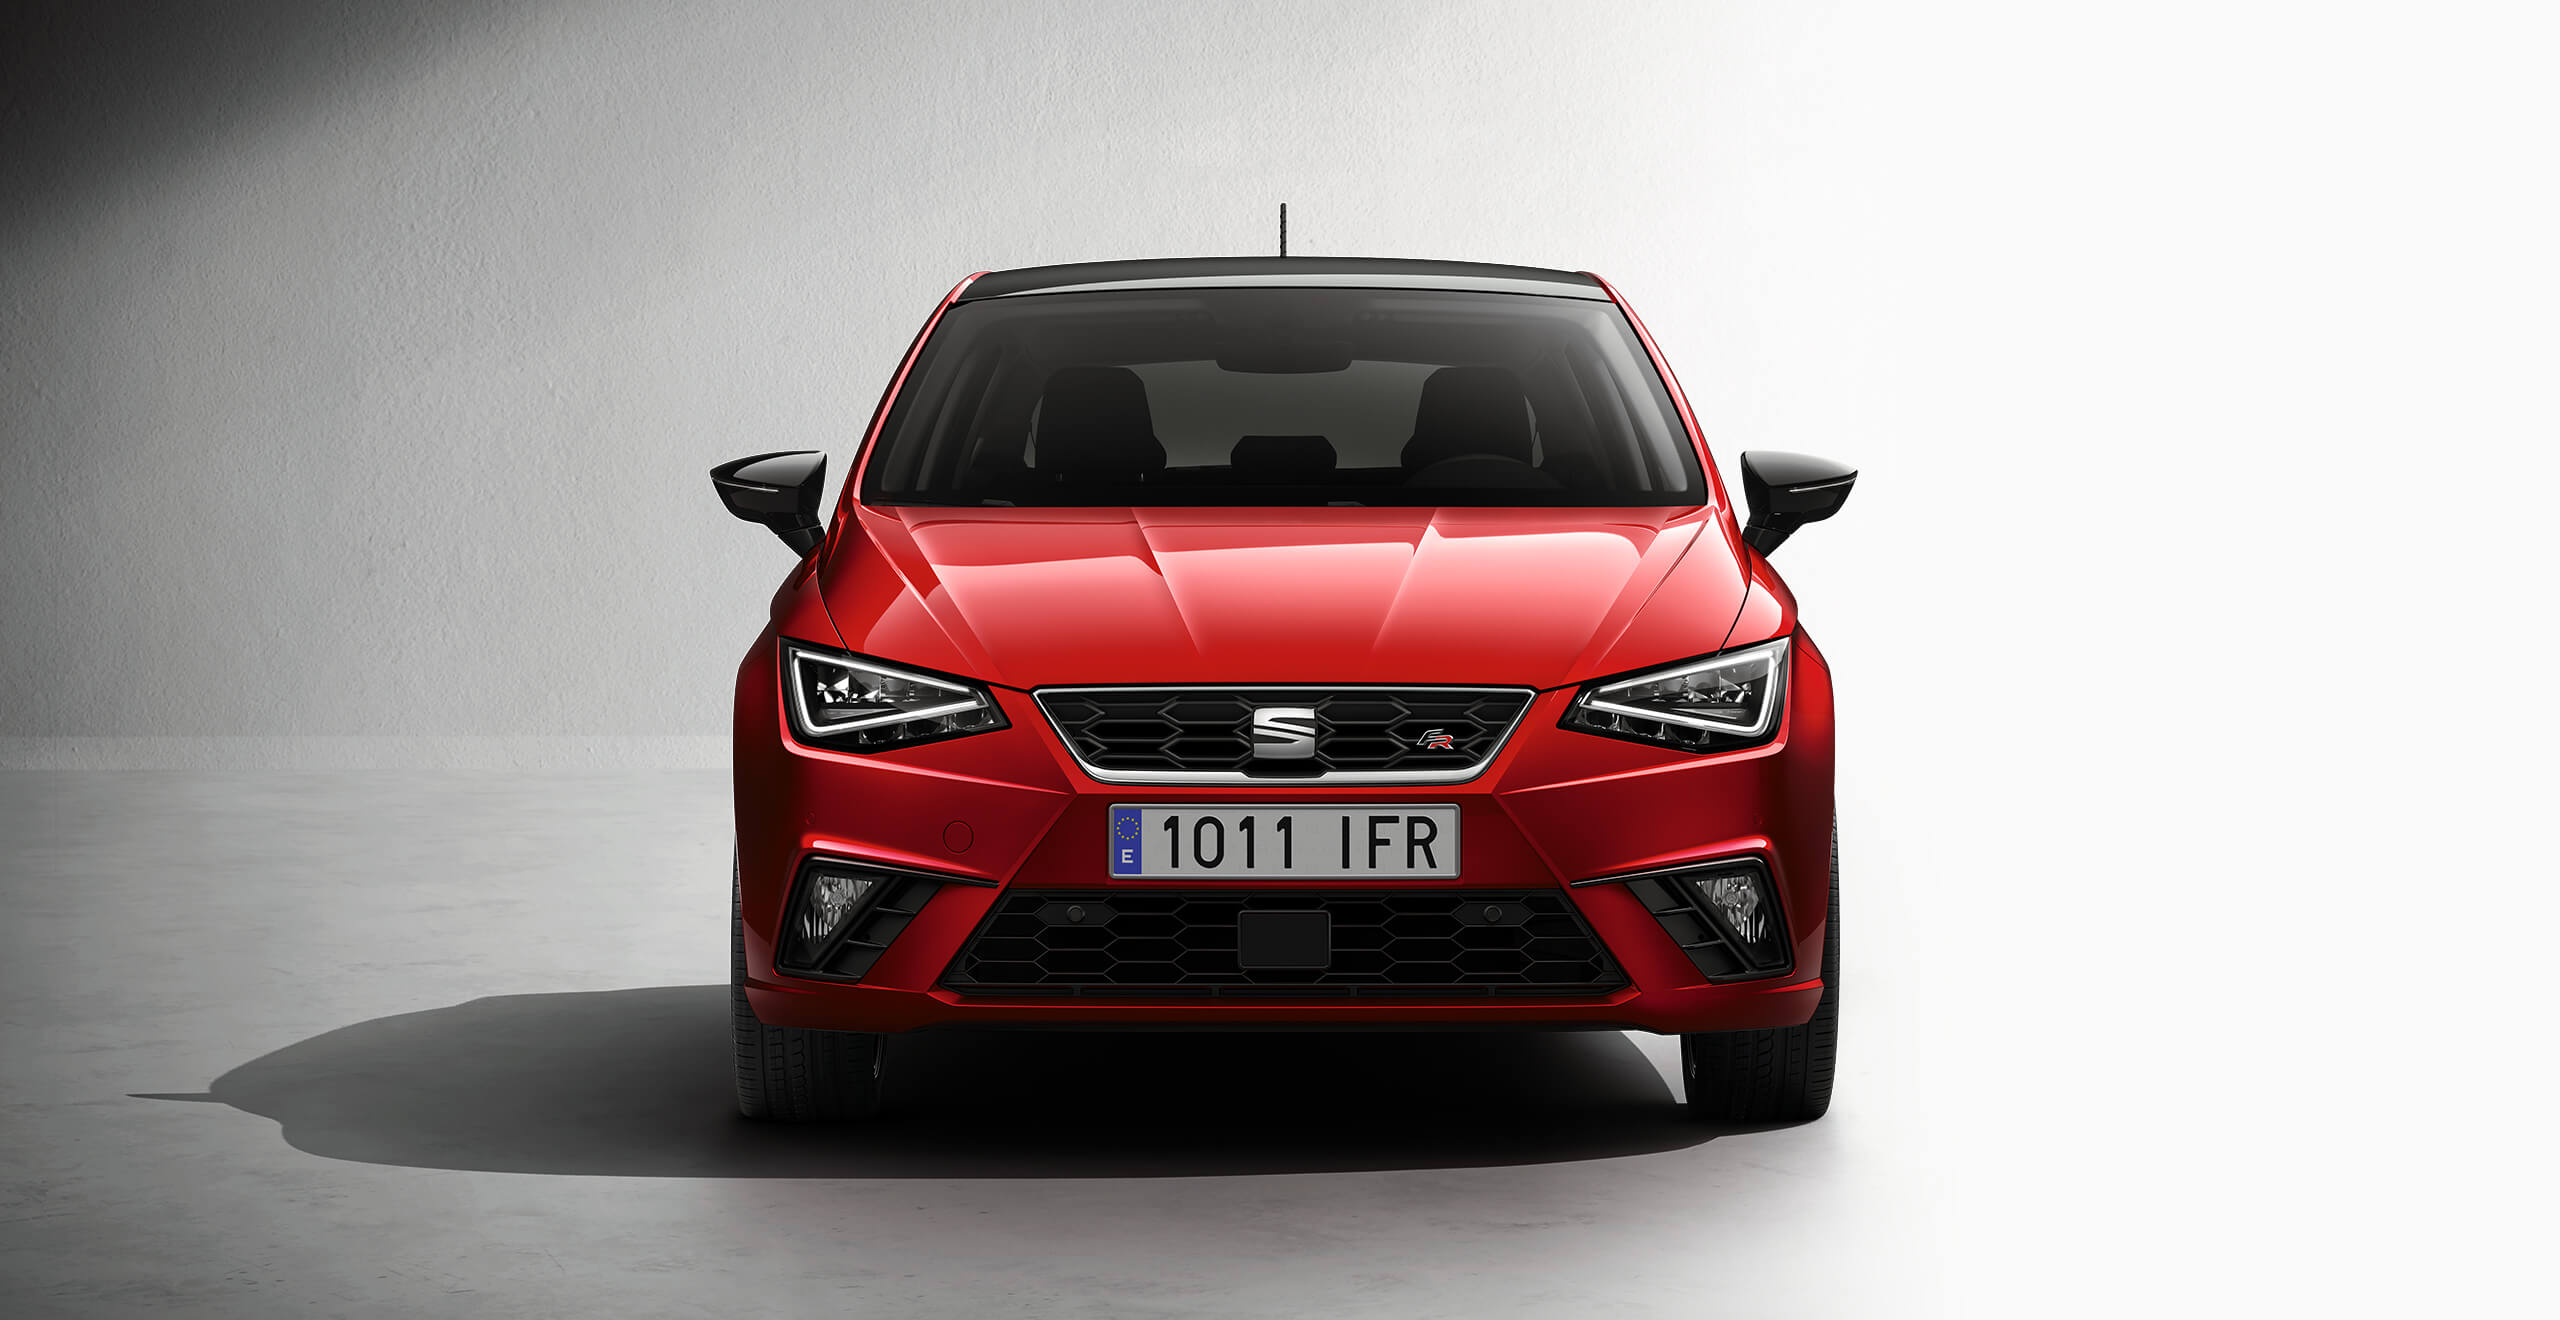 Shows a desire red 2018 SEAT Ibiza car model, its car side exterior view that reduce carbon emissions and performs a better car efficiency